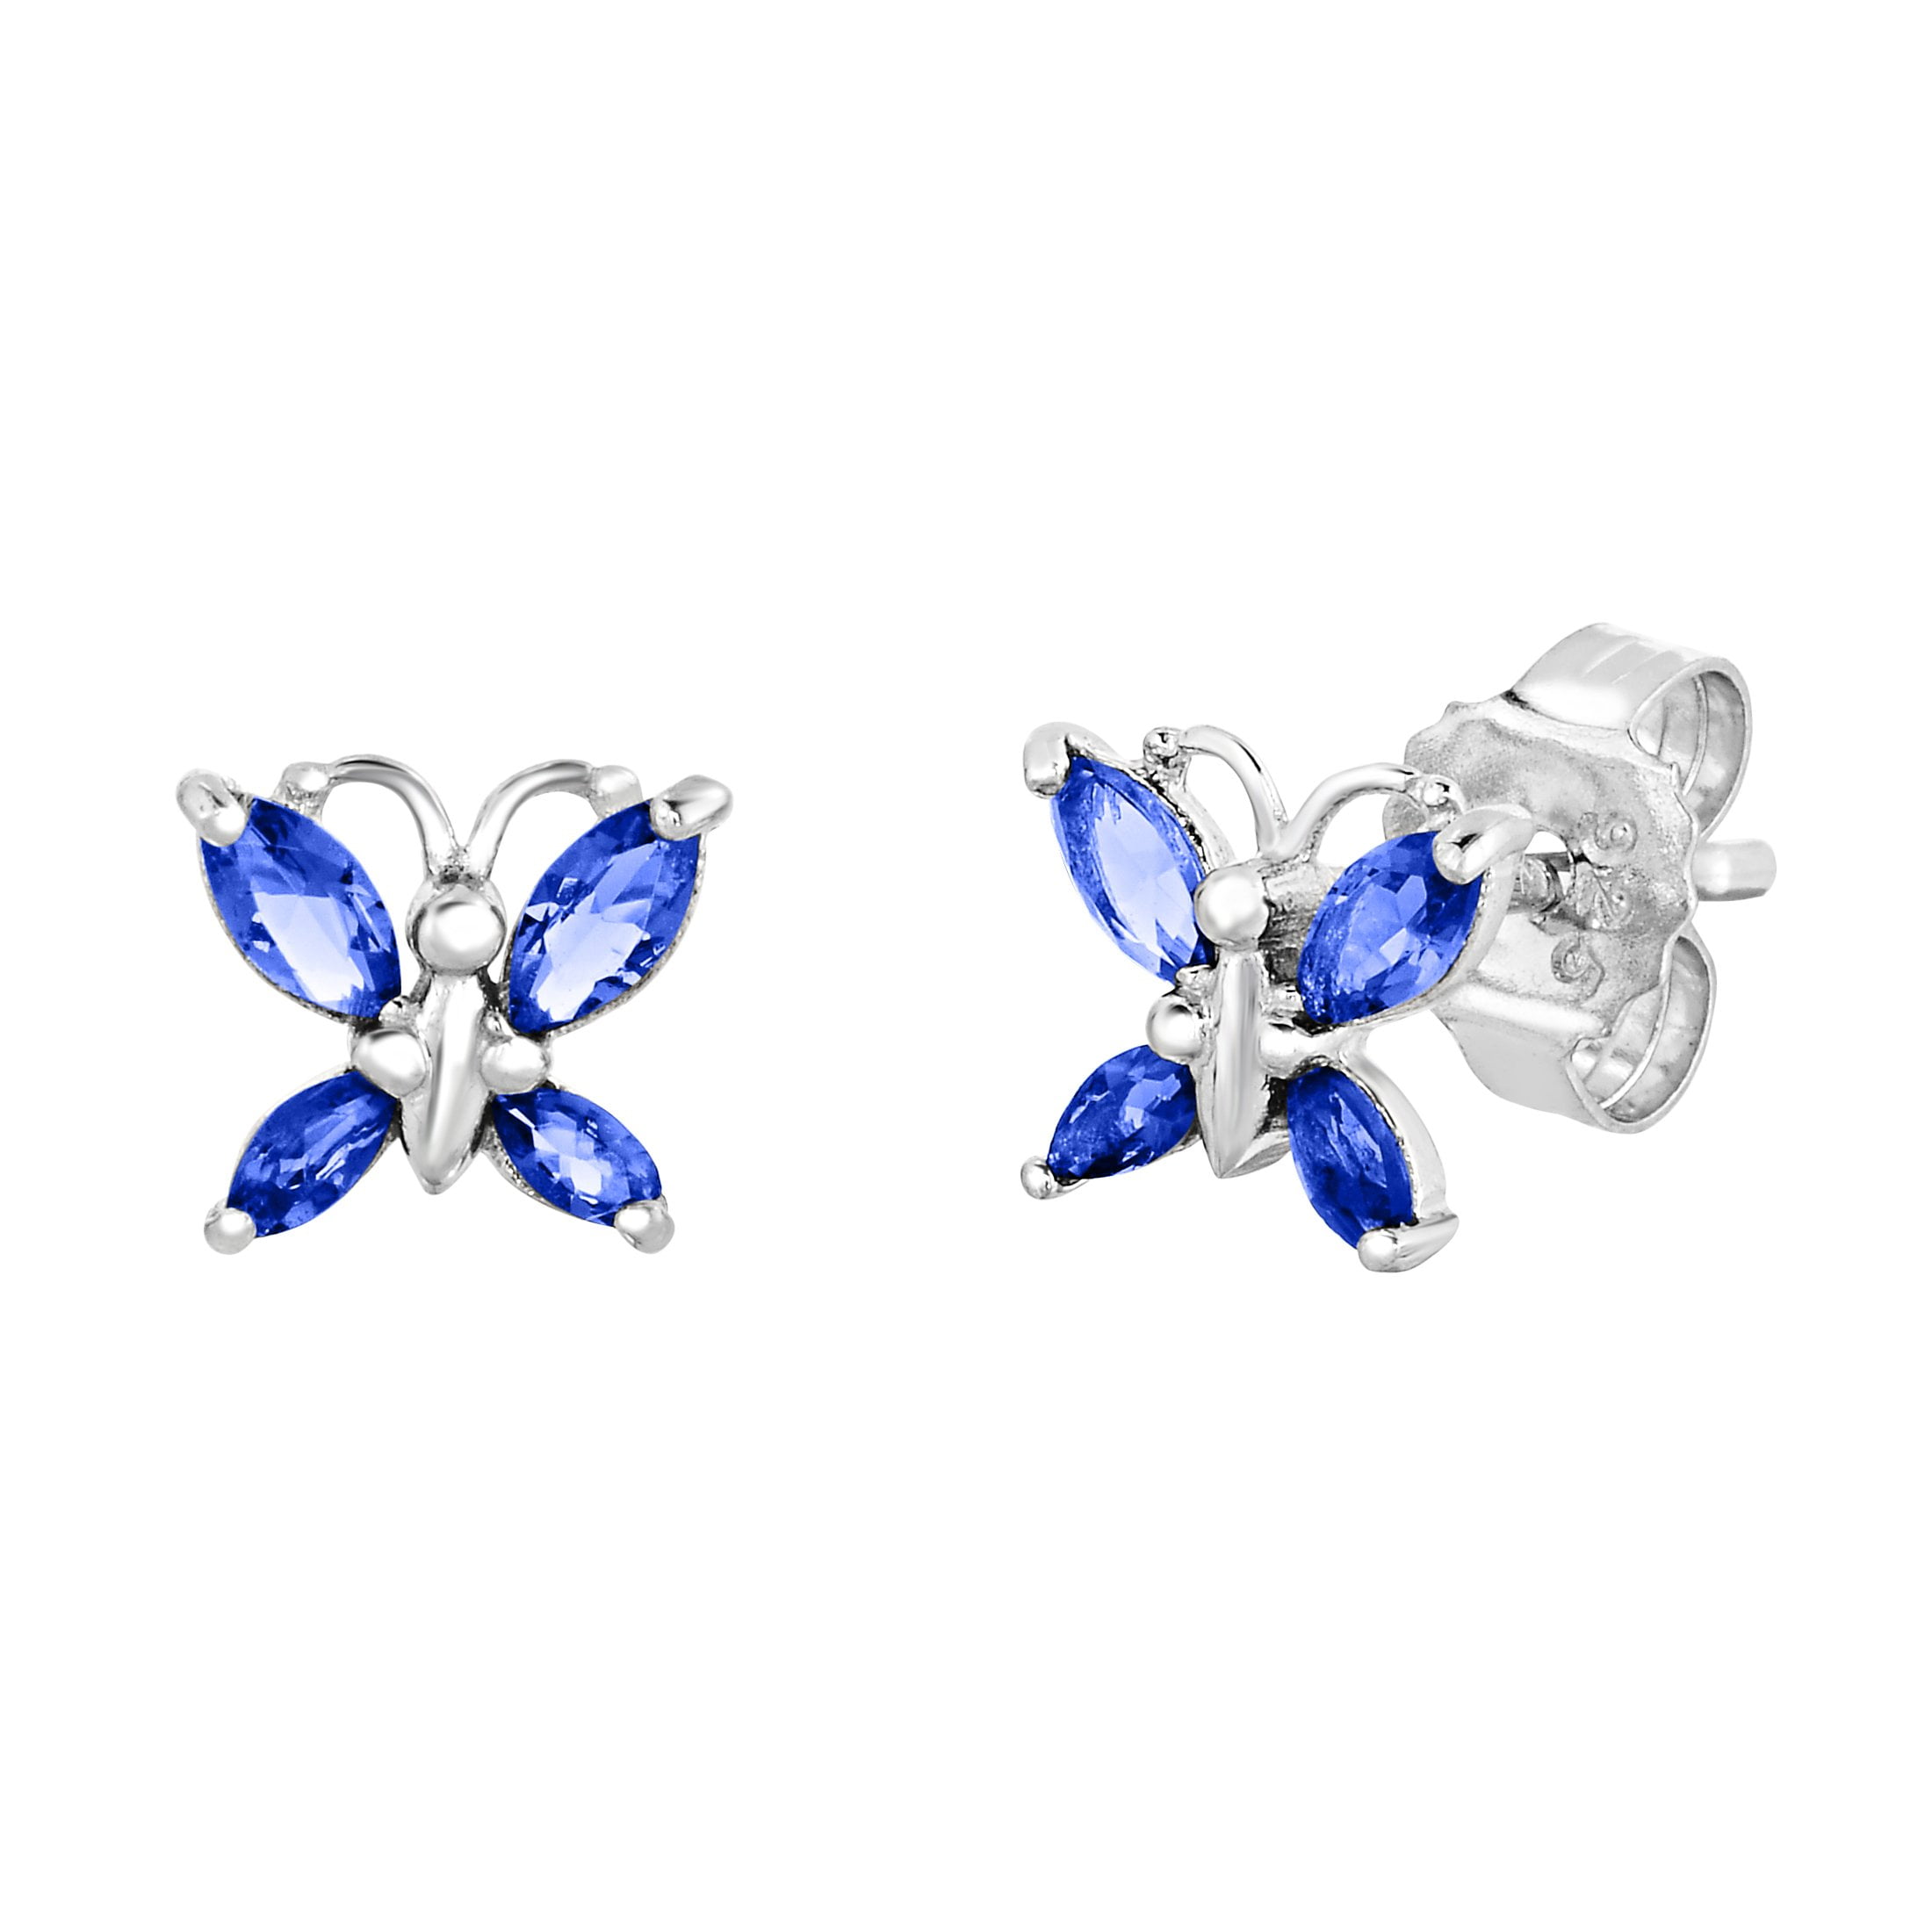 Tilo Sterling Silver Tiny Cz Butterfly Stud Earrings Push backs, Birthstone Simulated Sapphire 7mm (September)